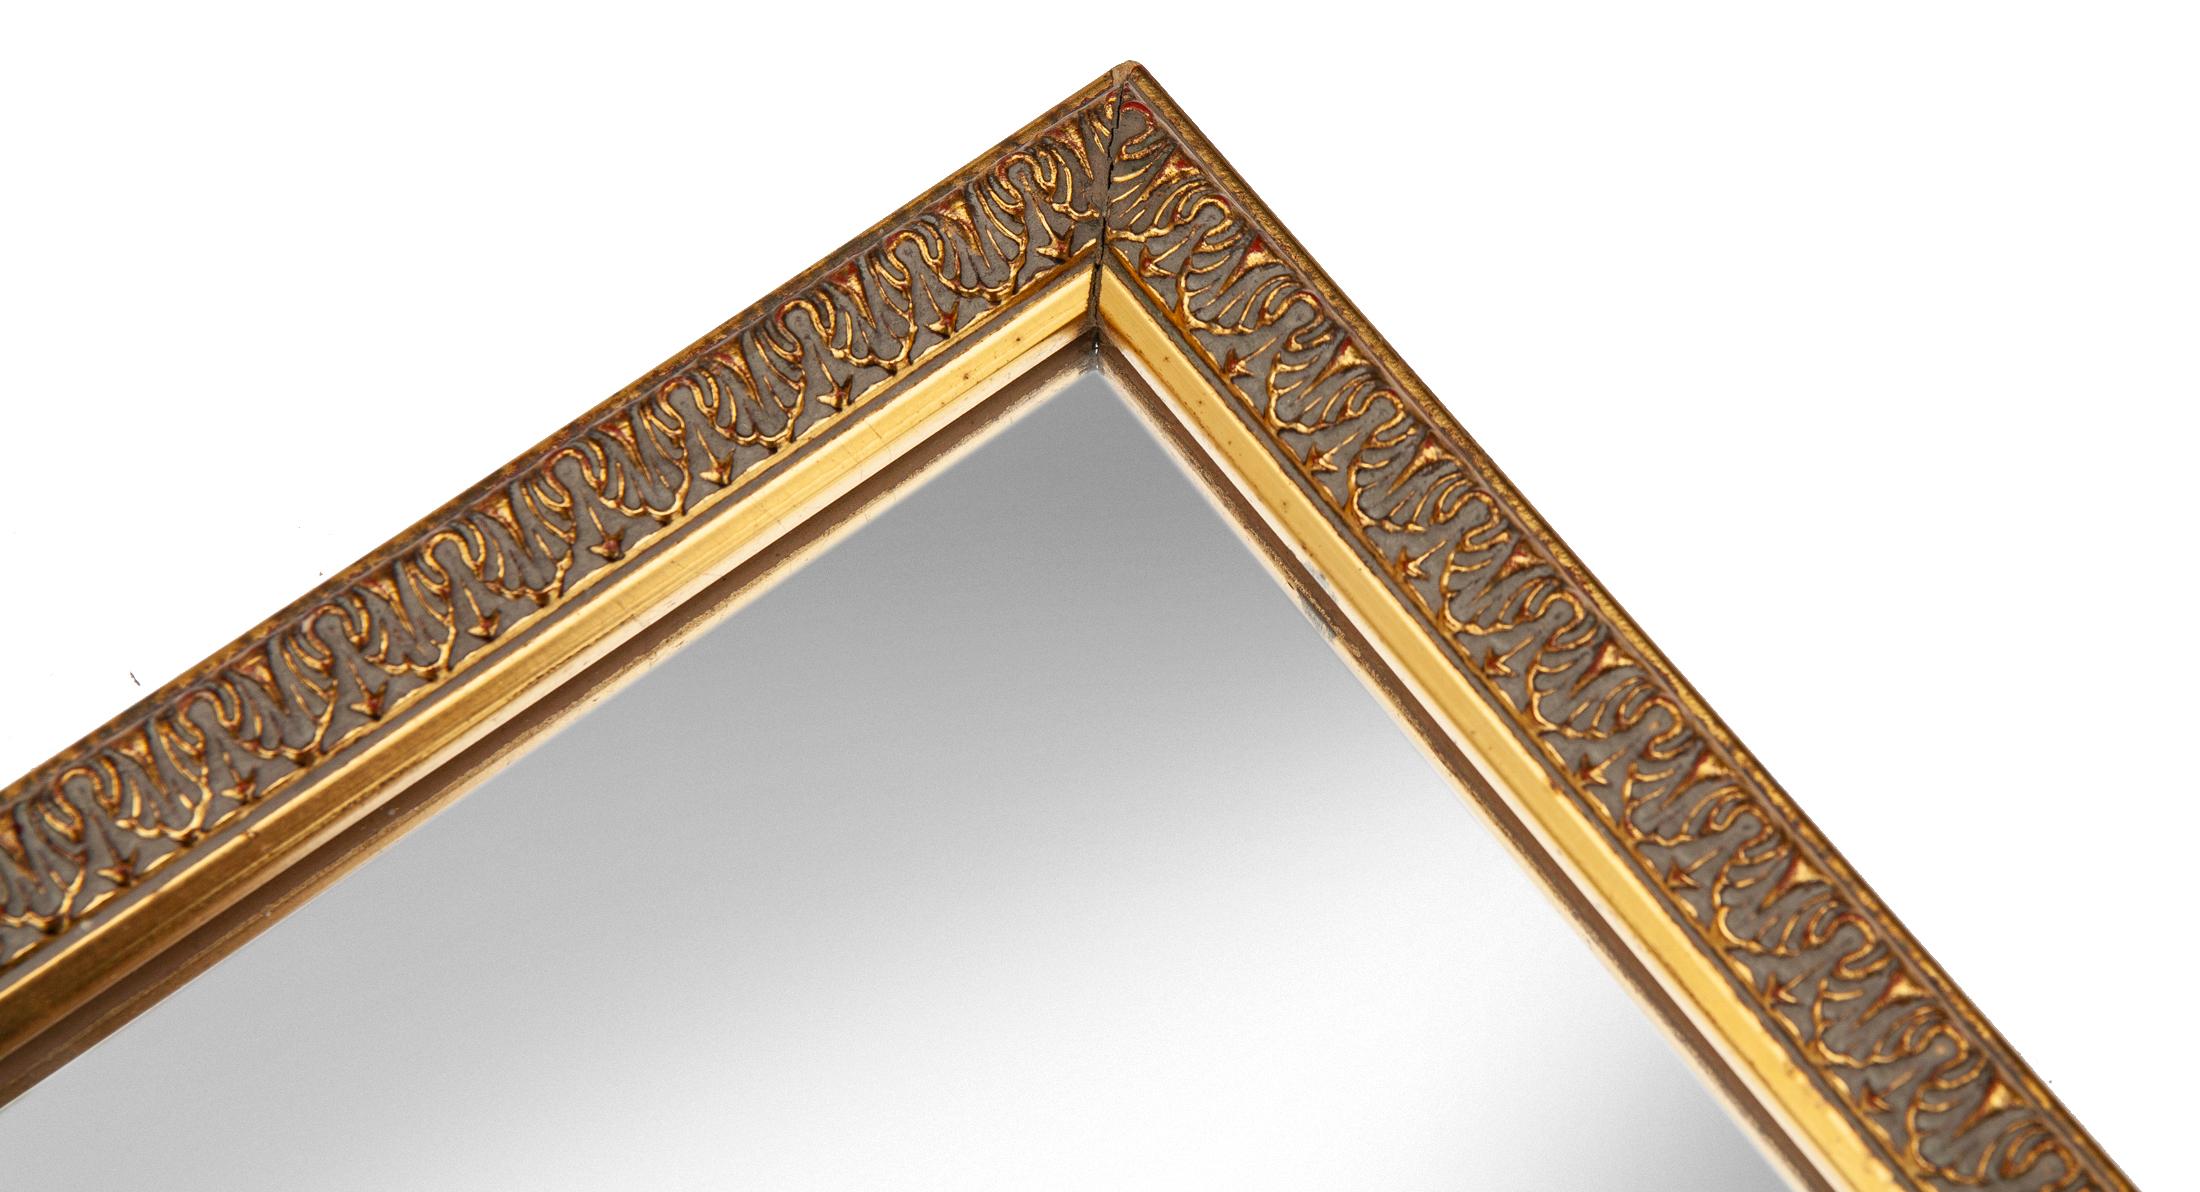 Simple European gilt framed square mirror with petite repetitive provincial pattern.
